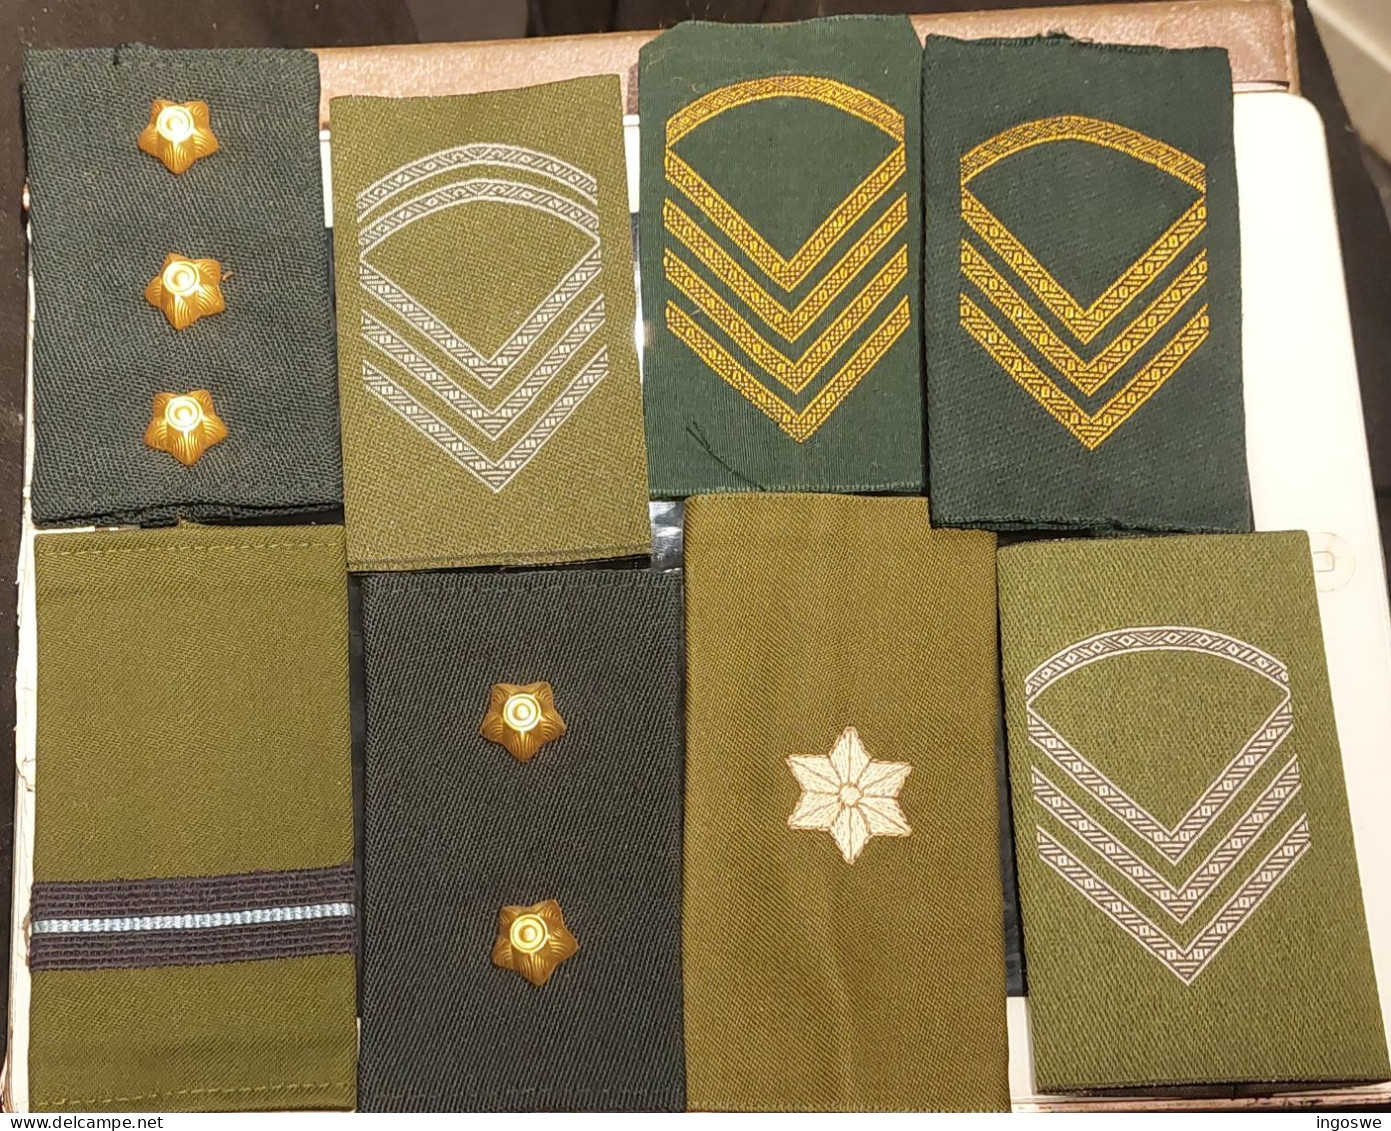 Uniformes - Denmark 8 different military patches/ insignias